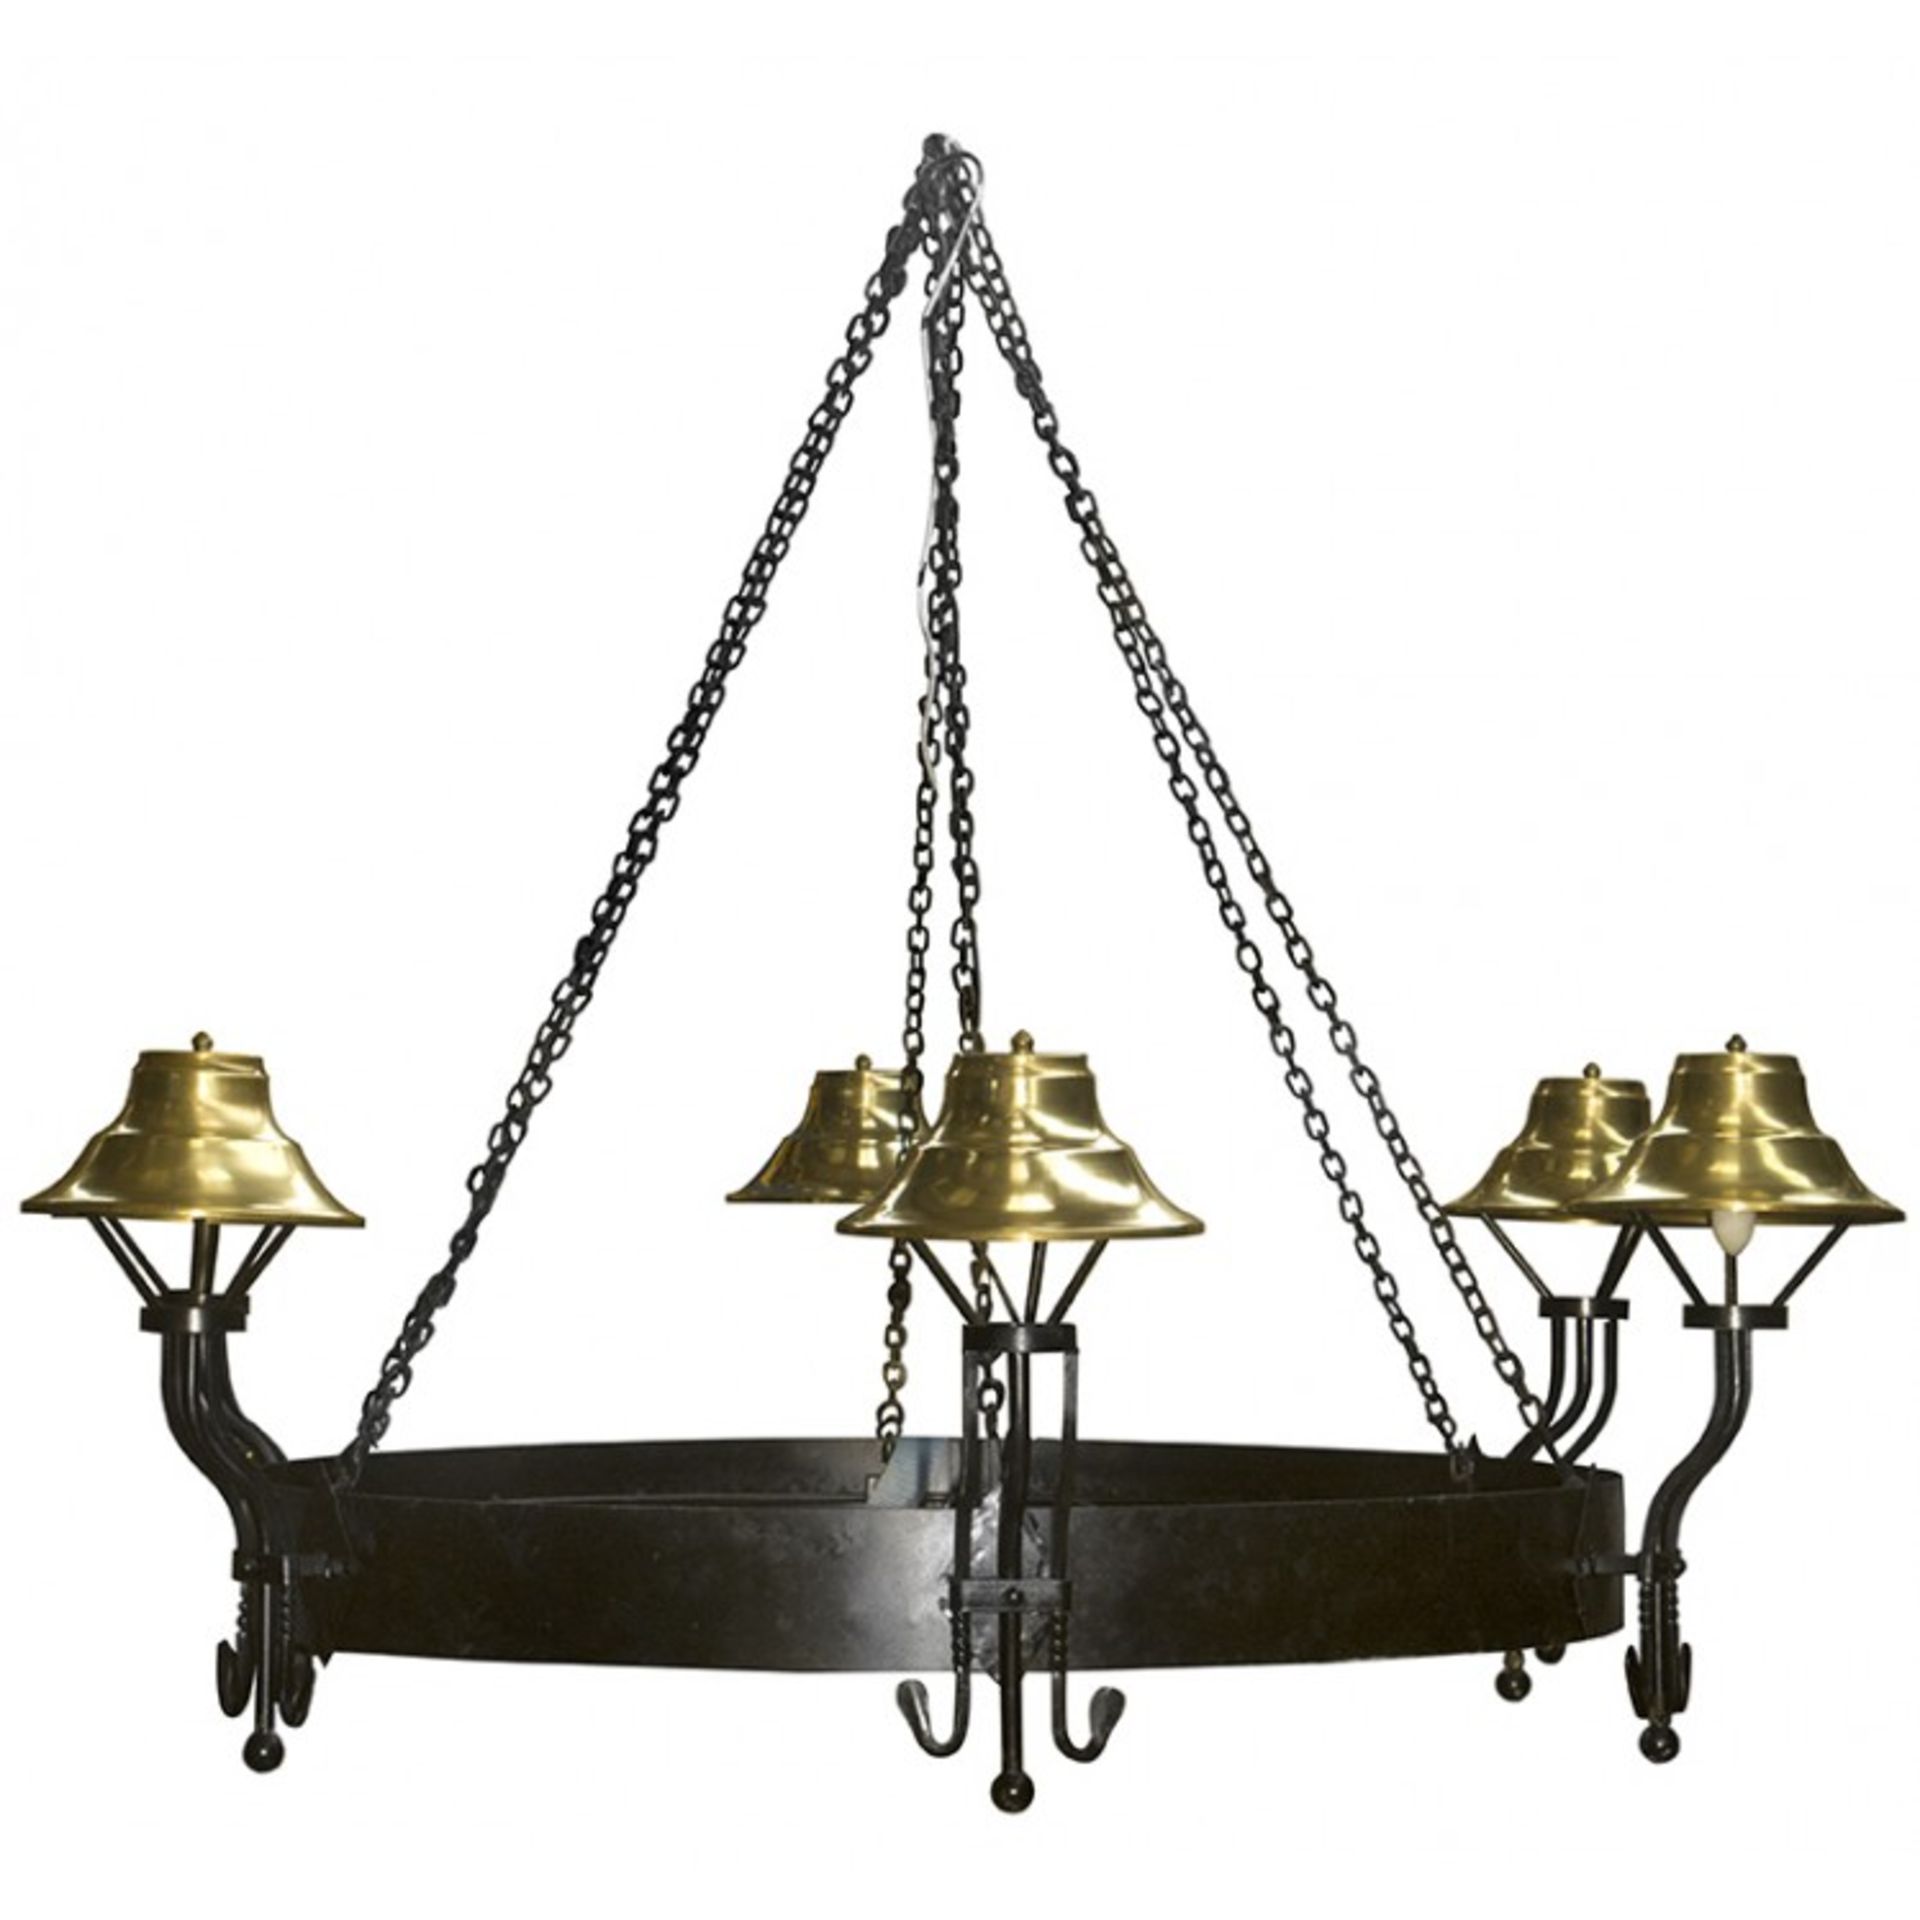 3 x Large Black and Gold Chandelier